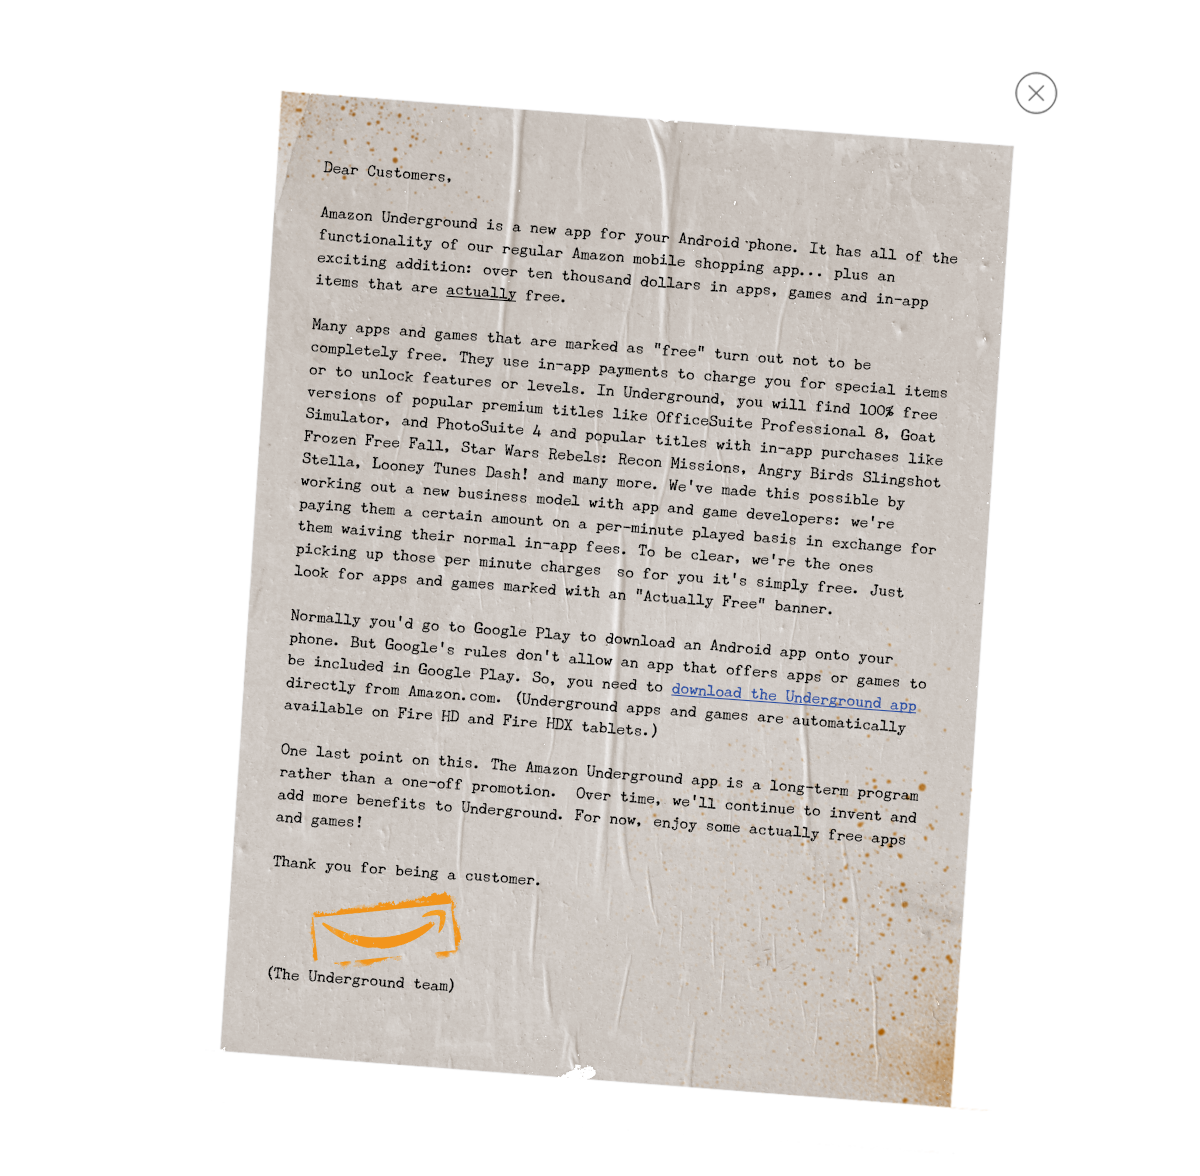 Amazon's letter announcing Underground. [Click to enlarge]